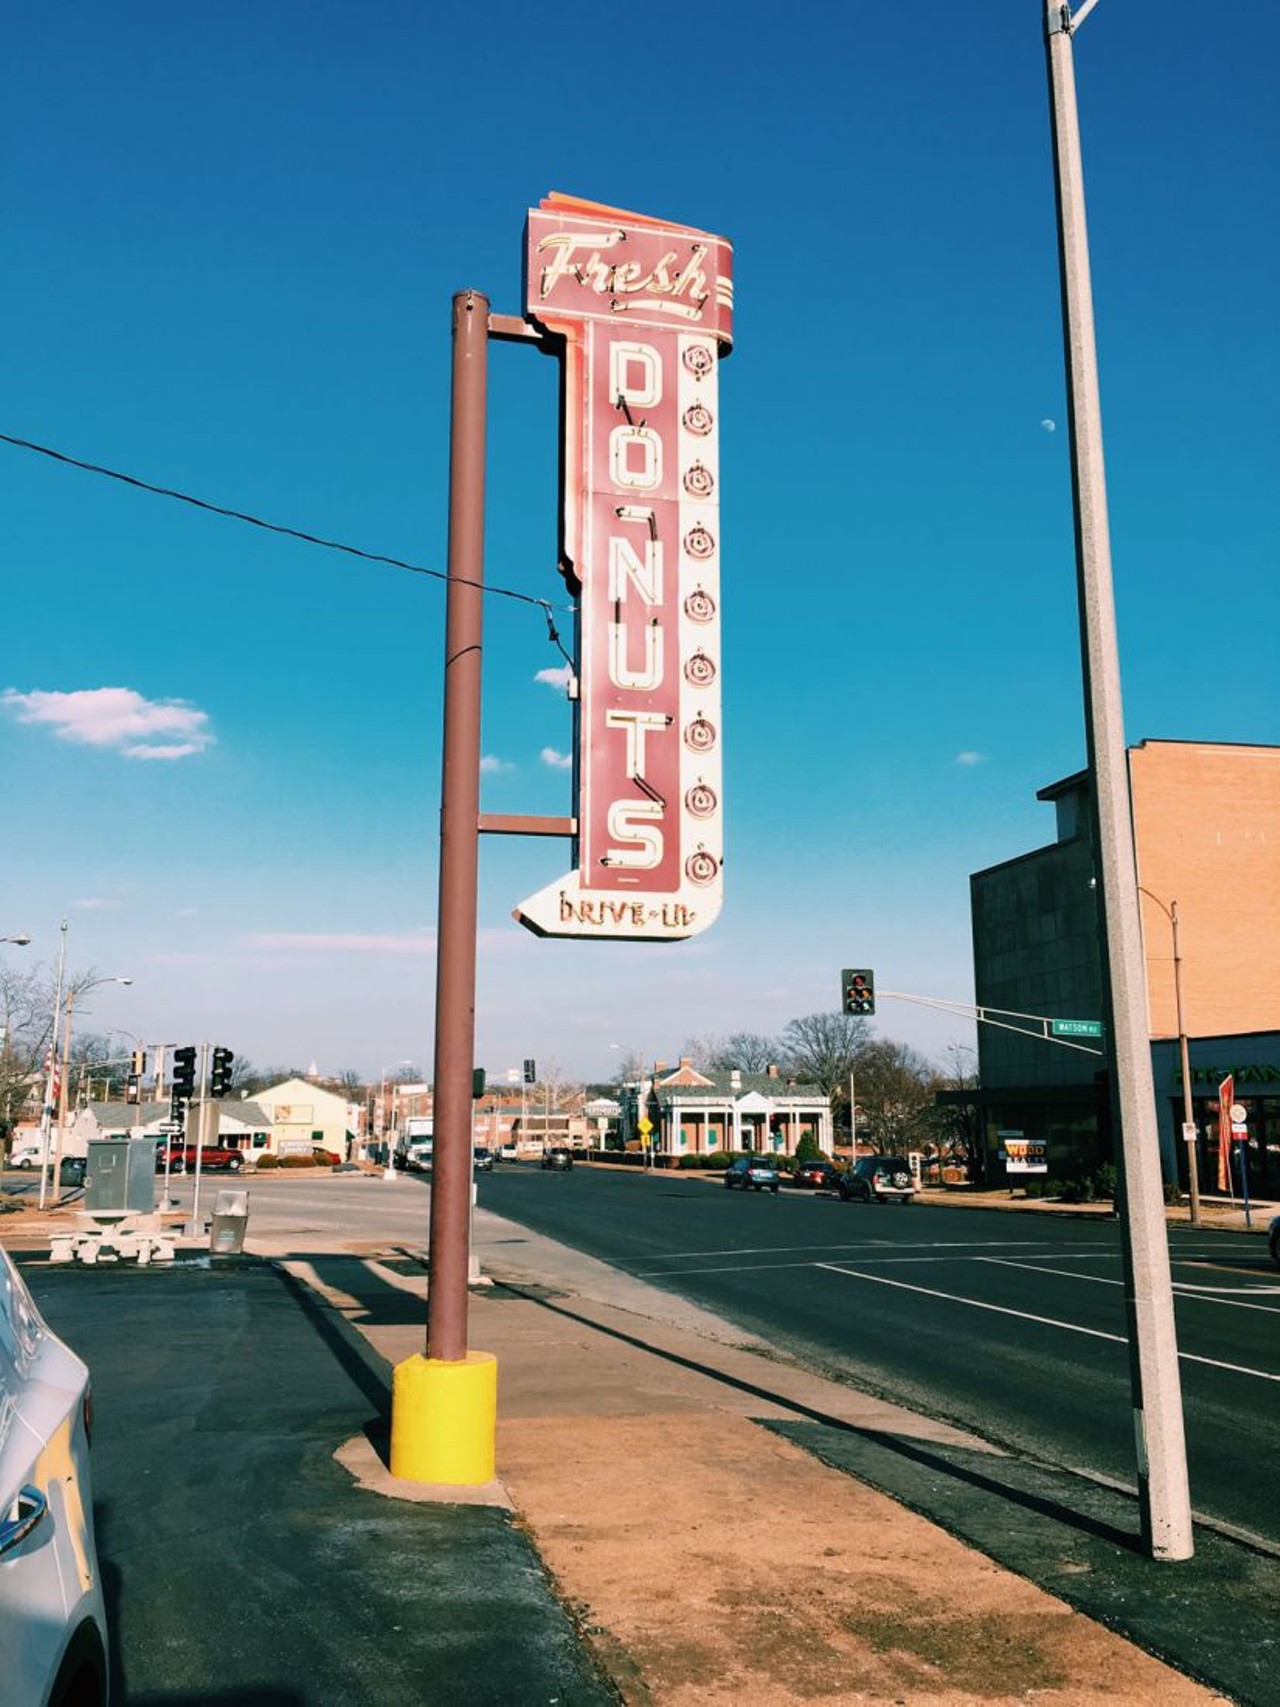 You'll know you've come to the right place when you see the retro Donut Drive-In sign.